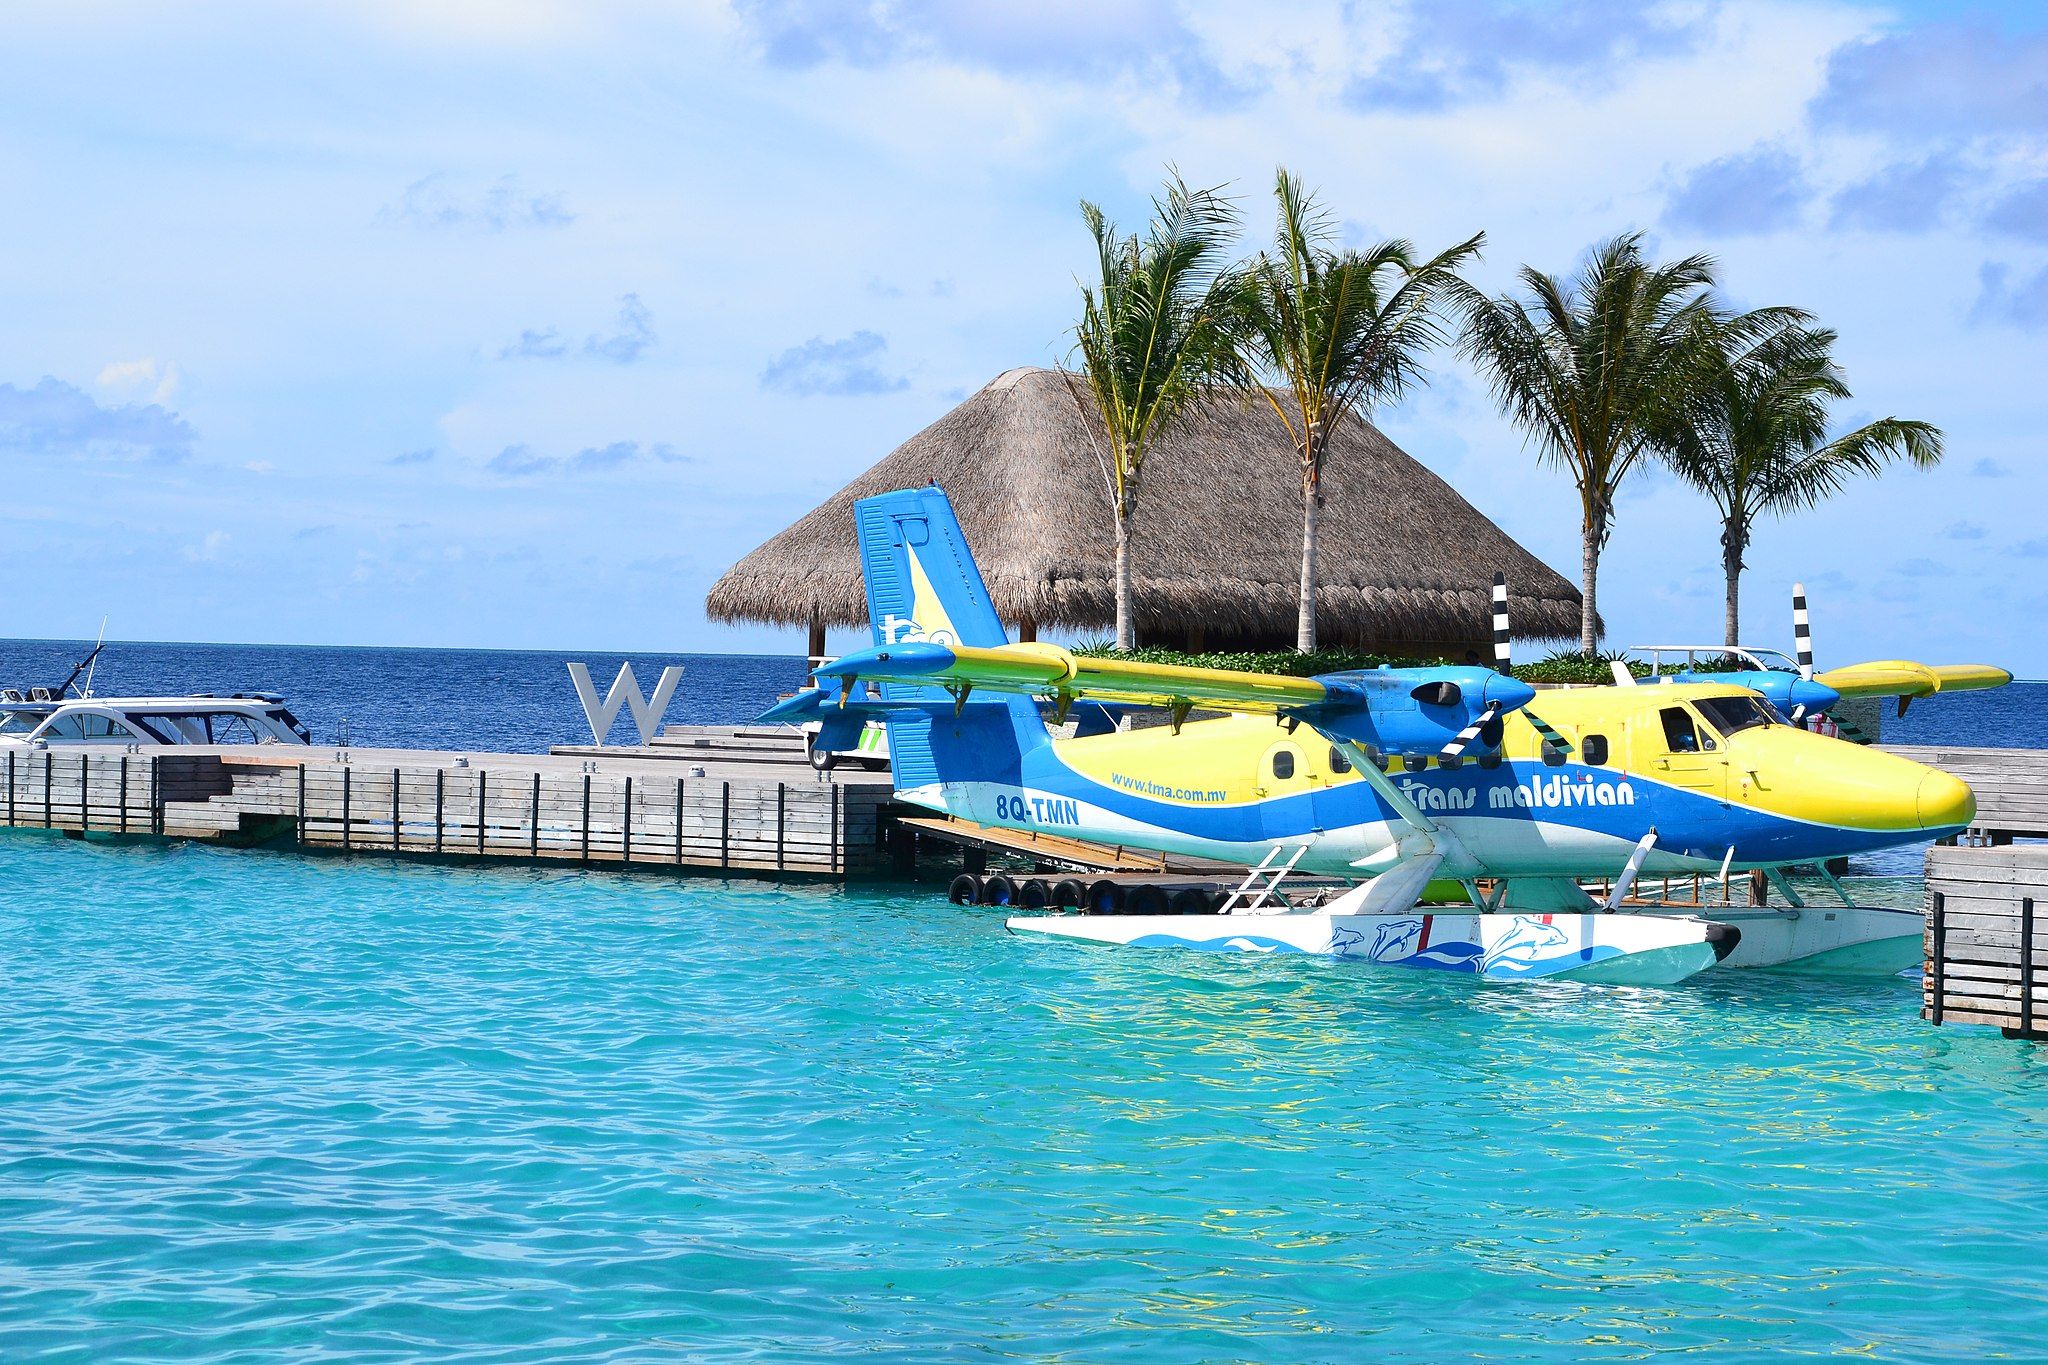 Seaplane parked at the W hotel in The Maldives.